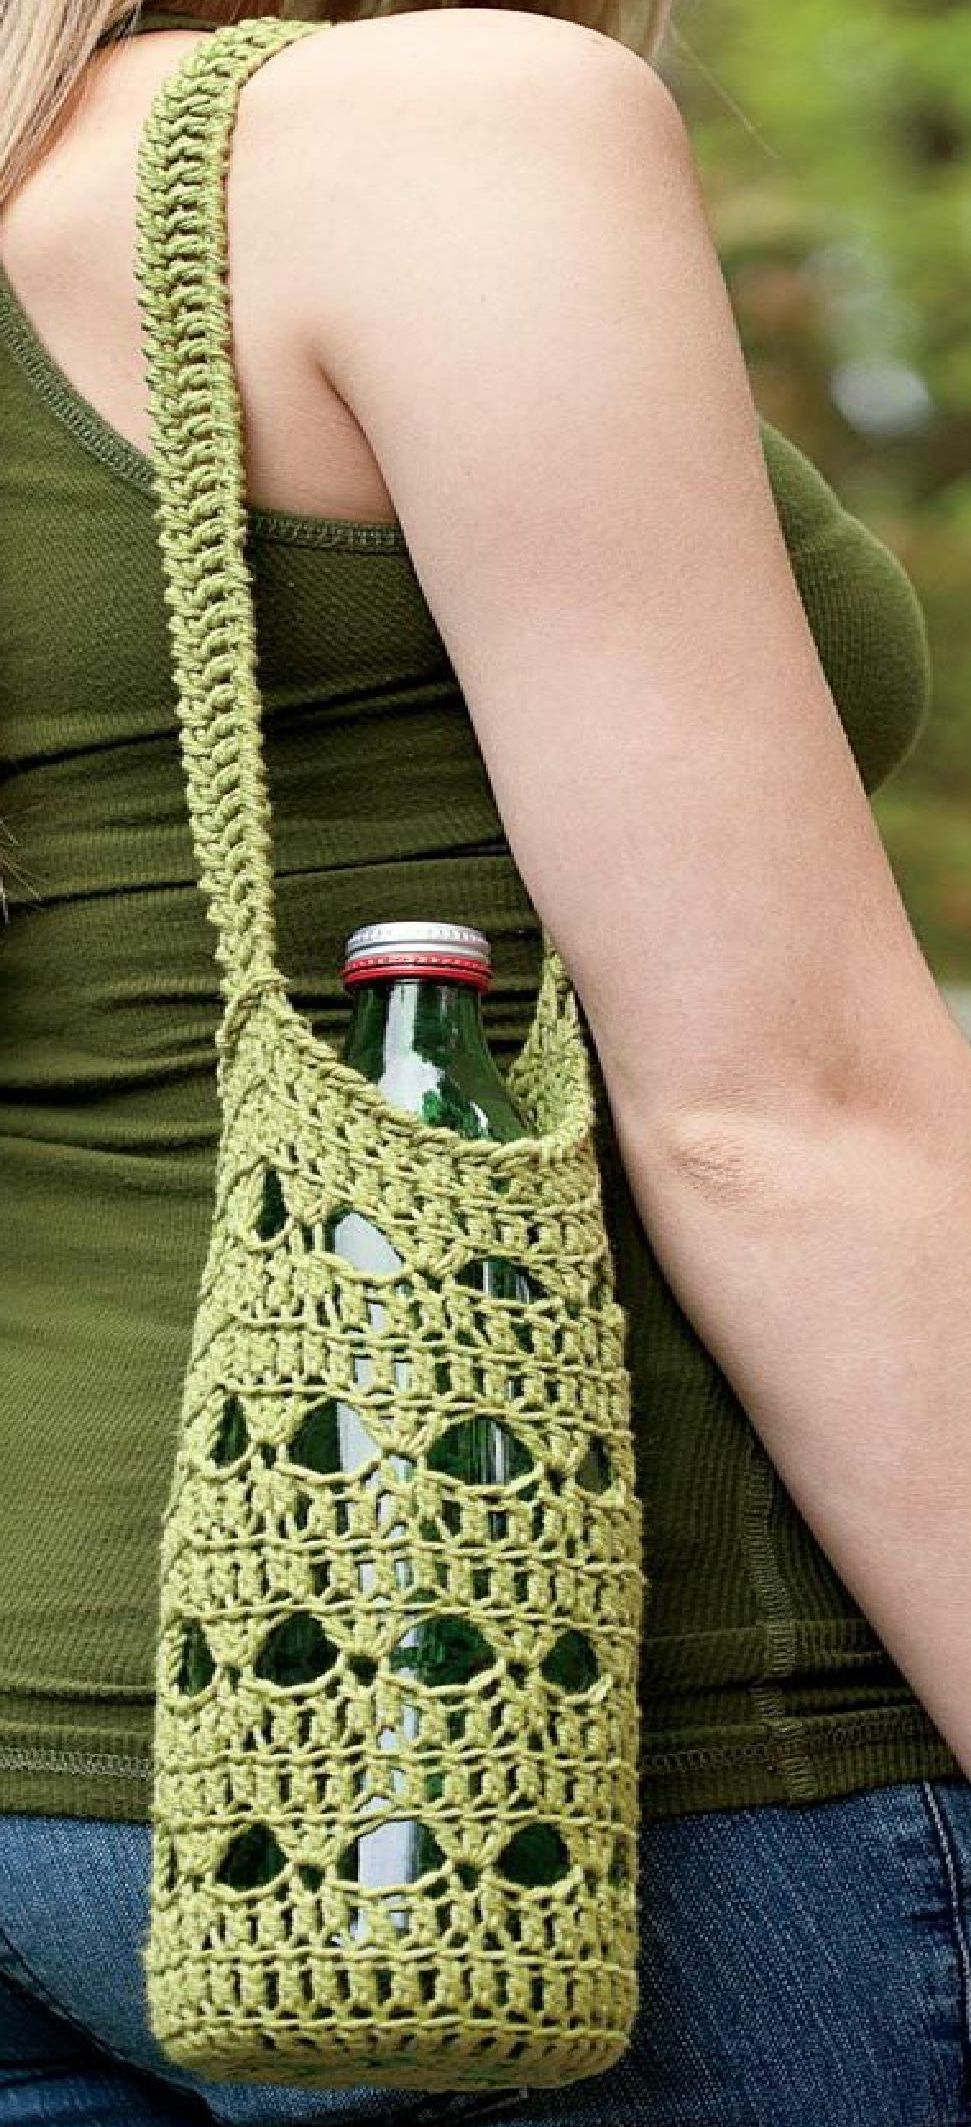 Crochet Holder Pattern Free Water Bottle Holder Pattern Click The Arrow To Go Forward To